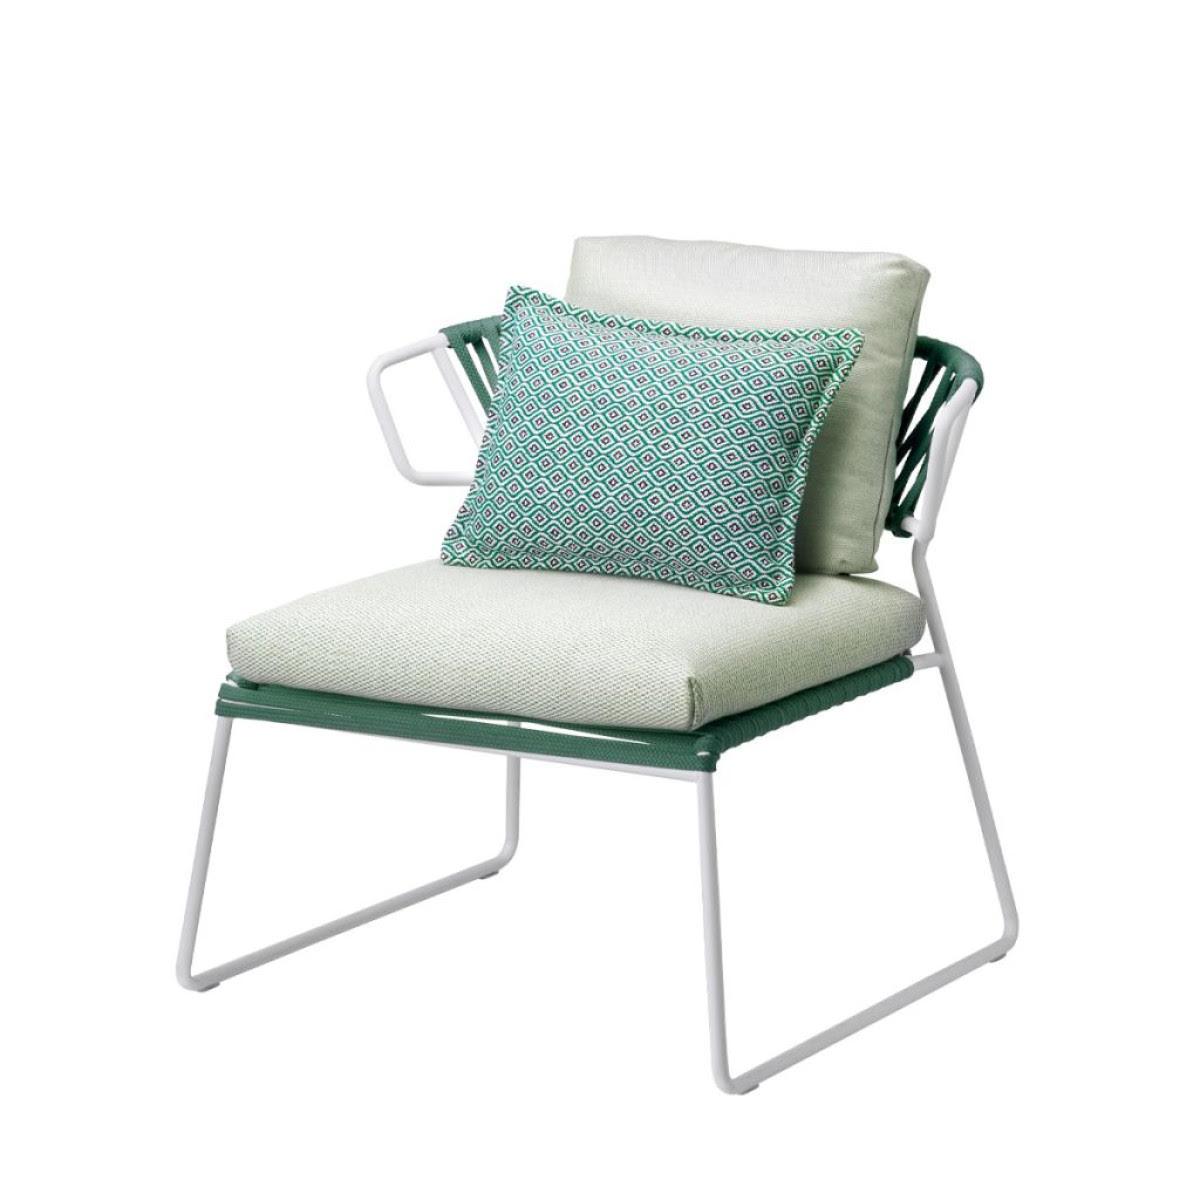 Modern Green Outdoor or Indoor Armchair in Metal and Ropes, 21 century
Modern production armchair for outdoor or indoor use. The frame is made of metal and reinforced with ropes on the back and seat. This armchair has an innovative, modern and fresh